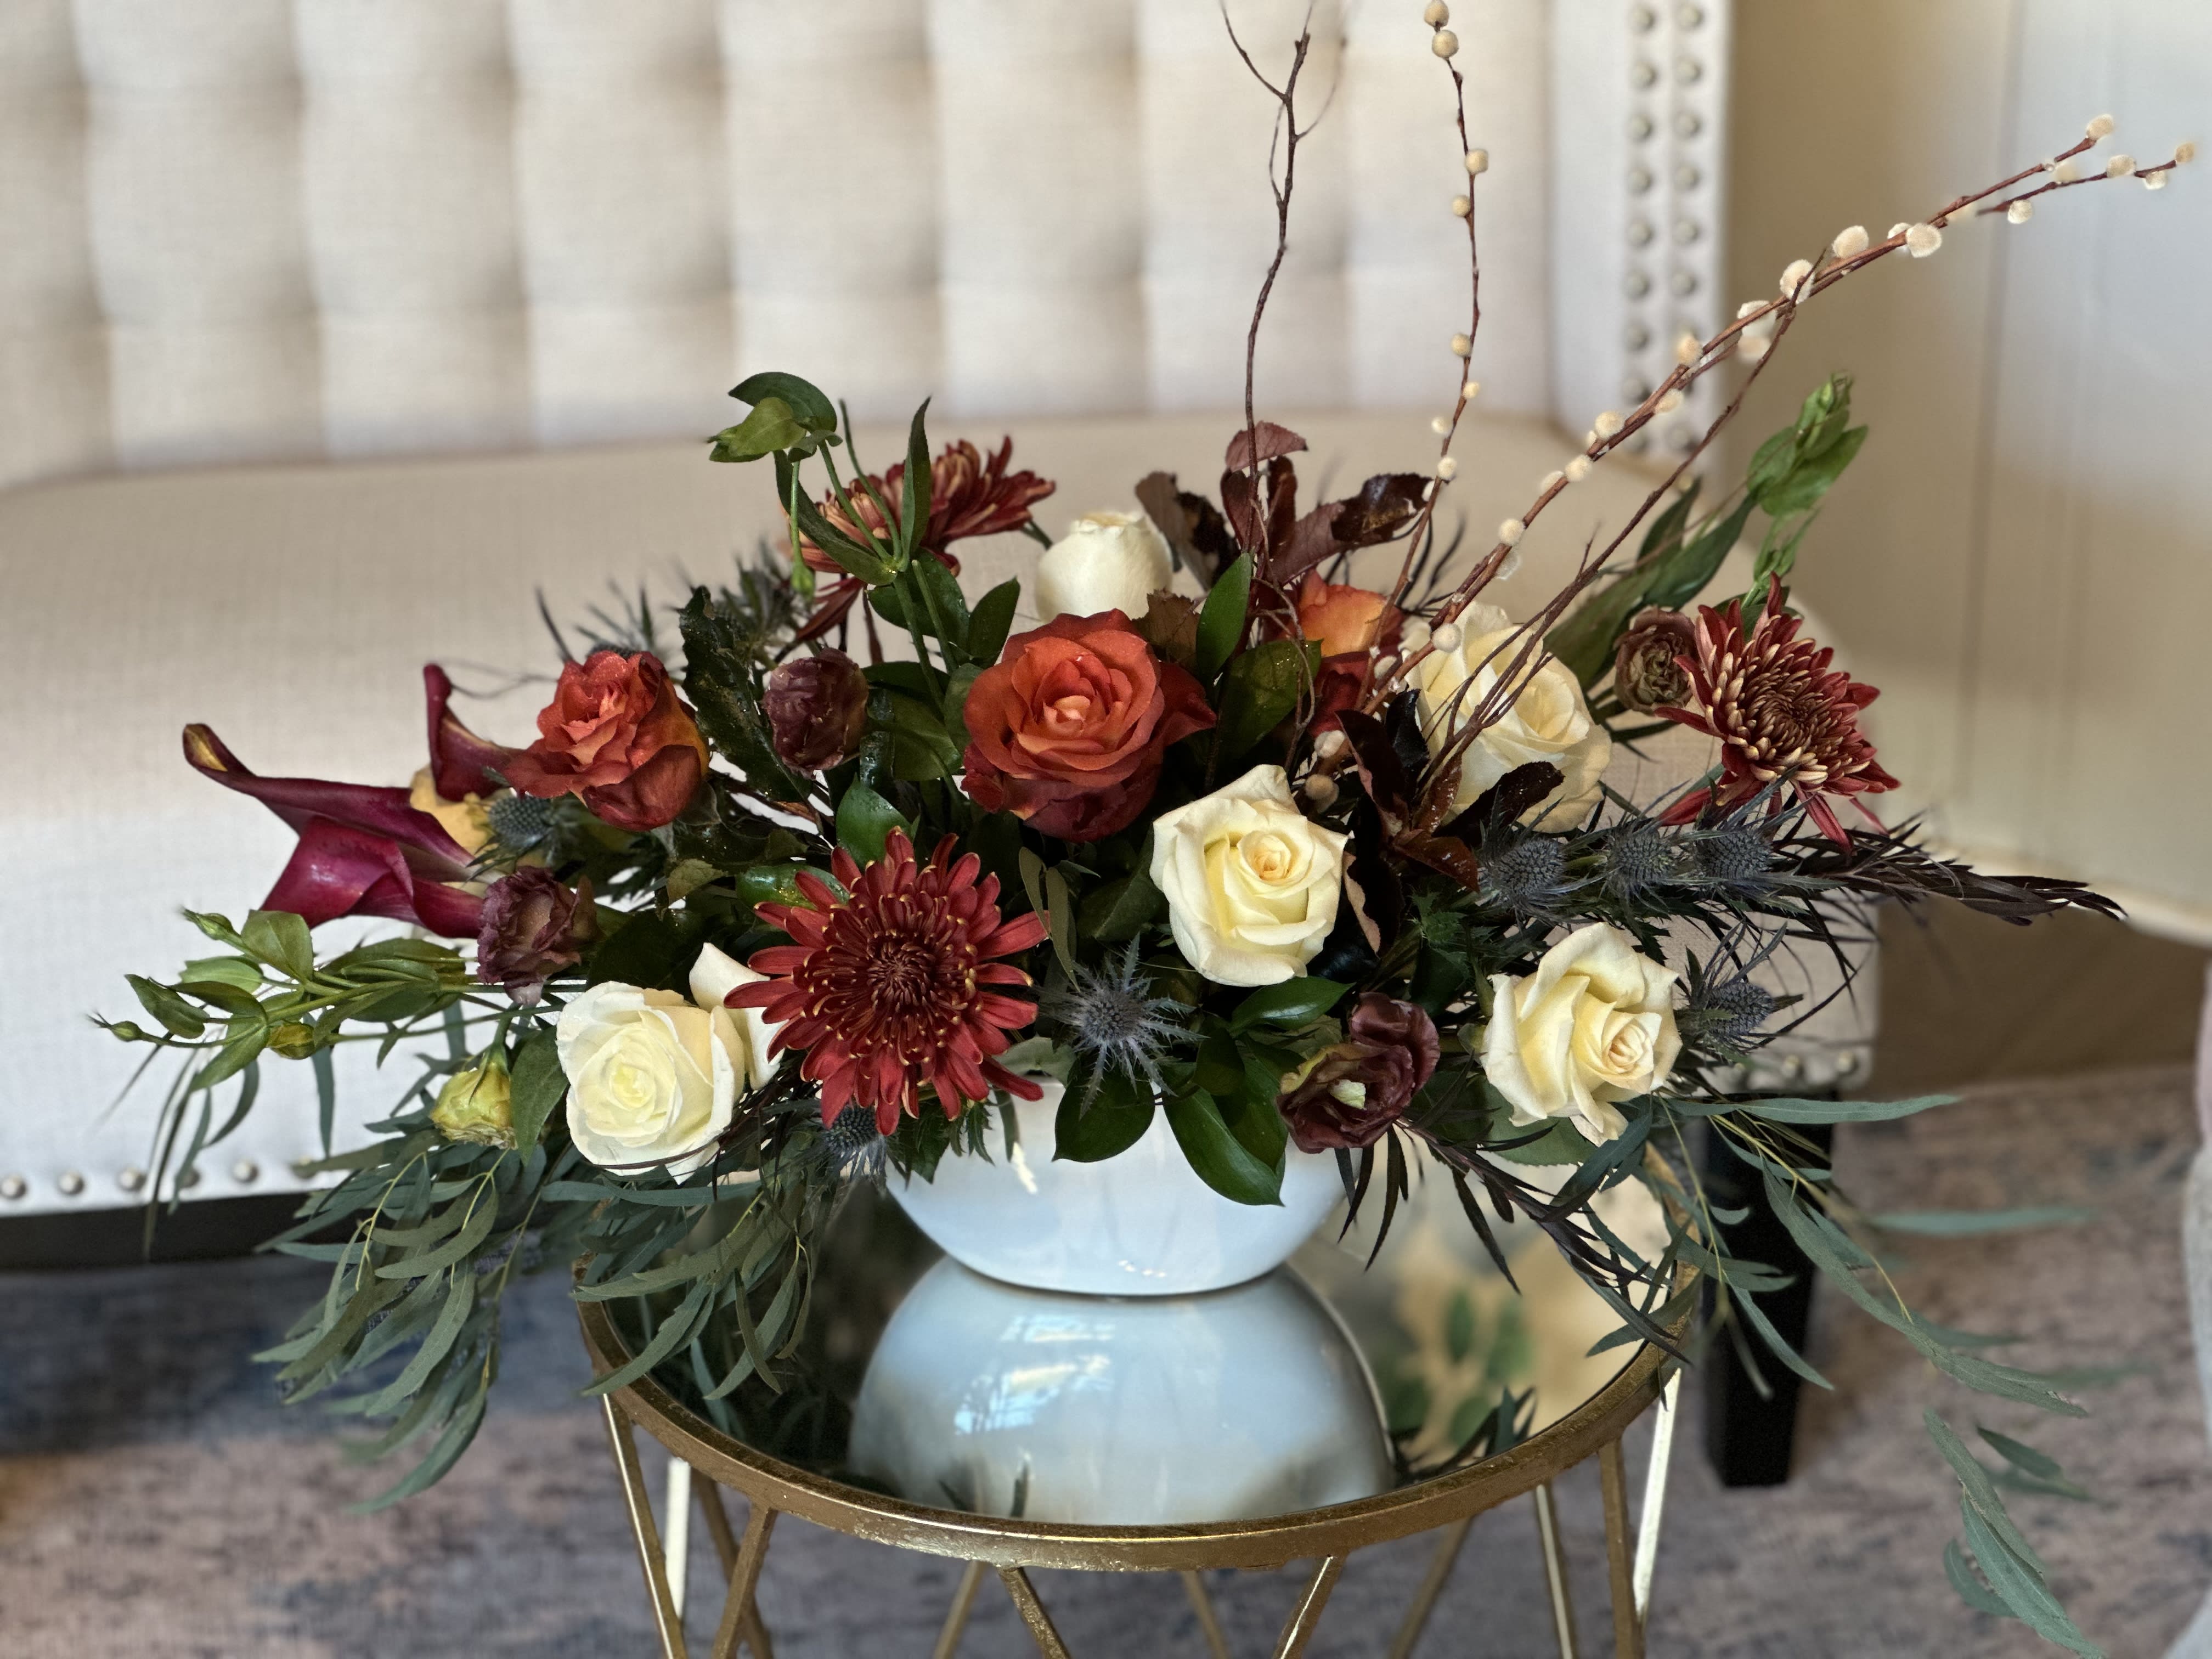 Sweater Weather Blooms - Embrace the cozy vibes with this stunning fall arrangement!